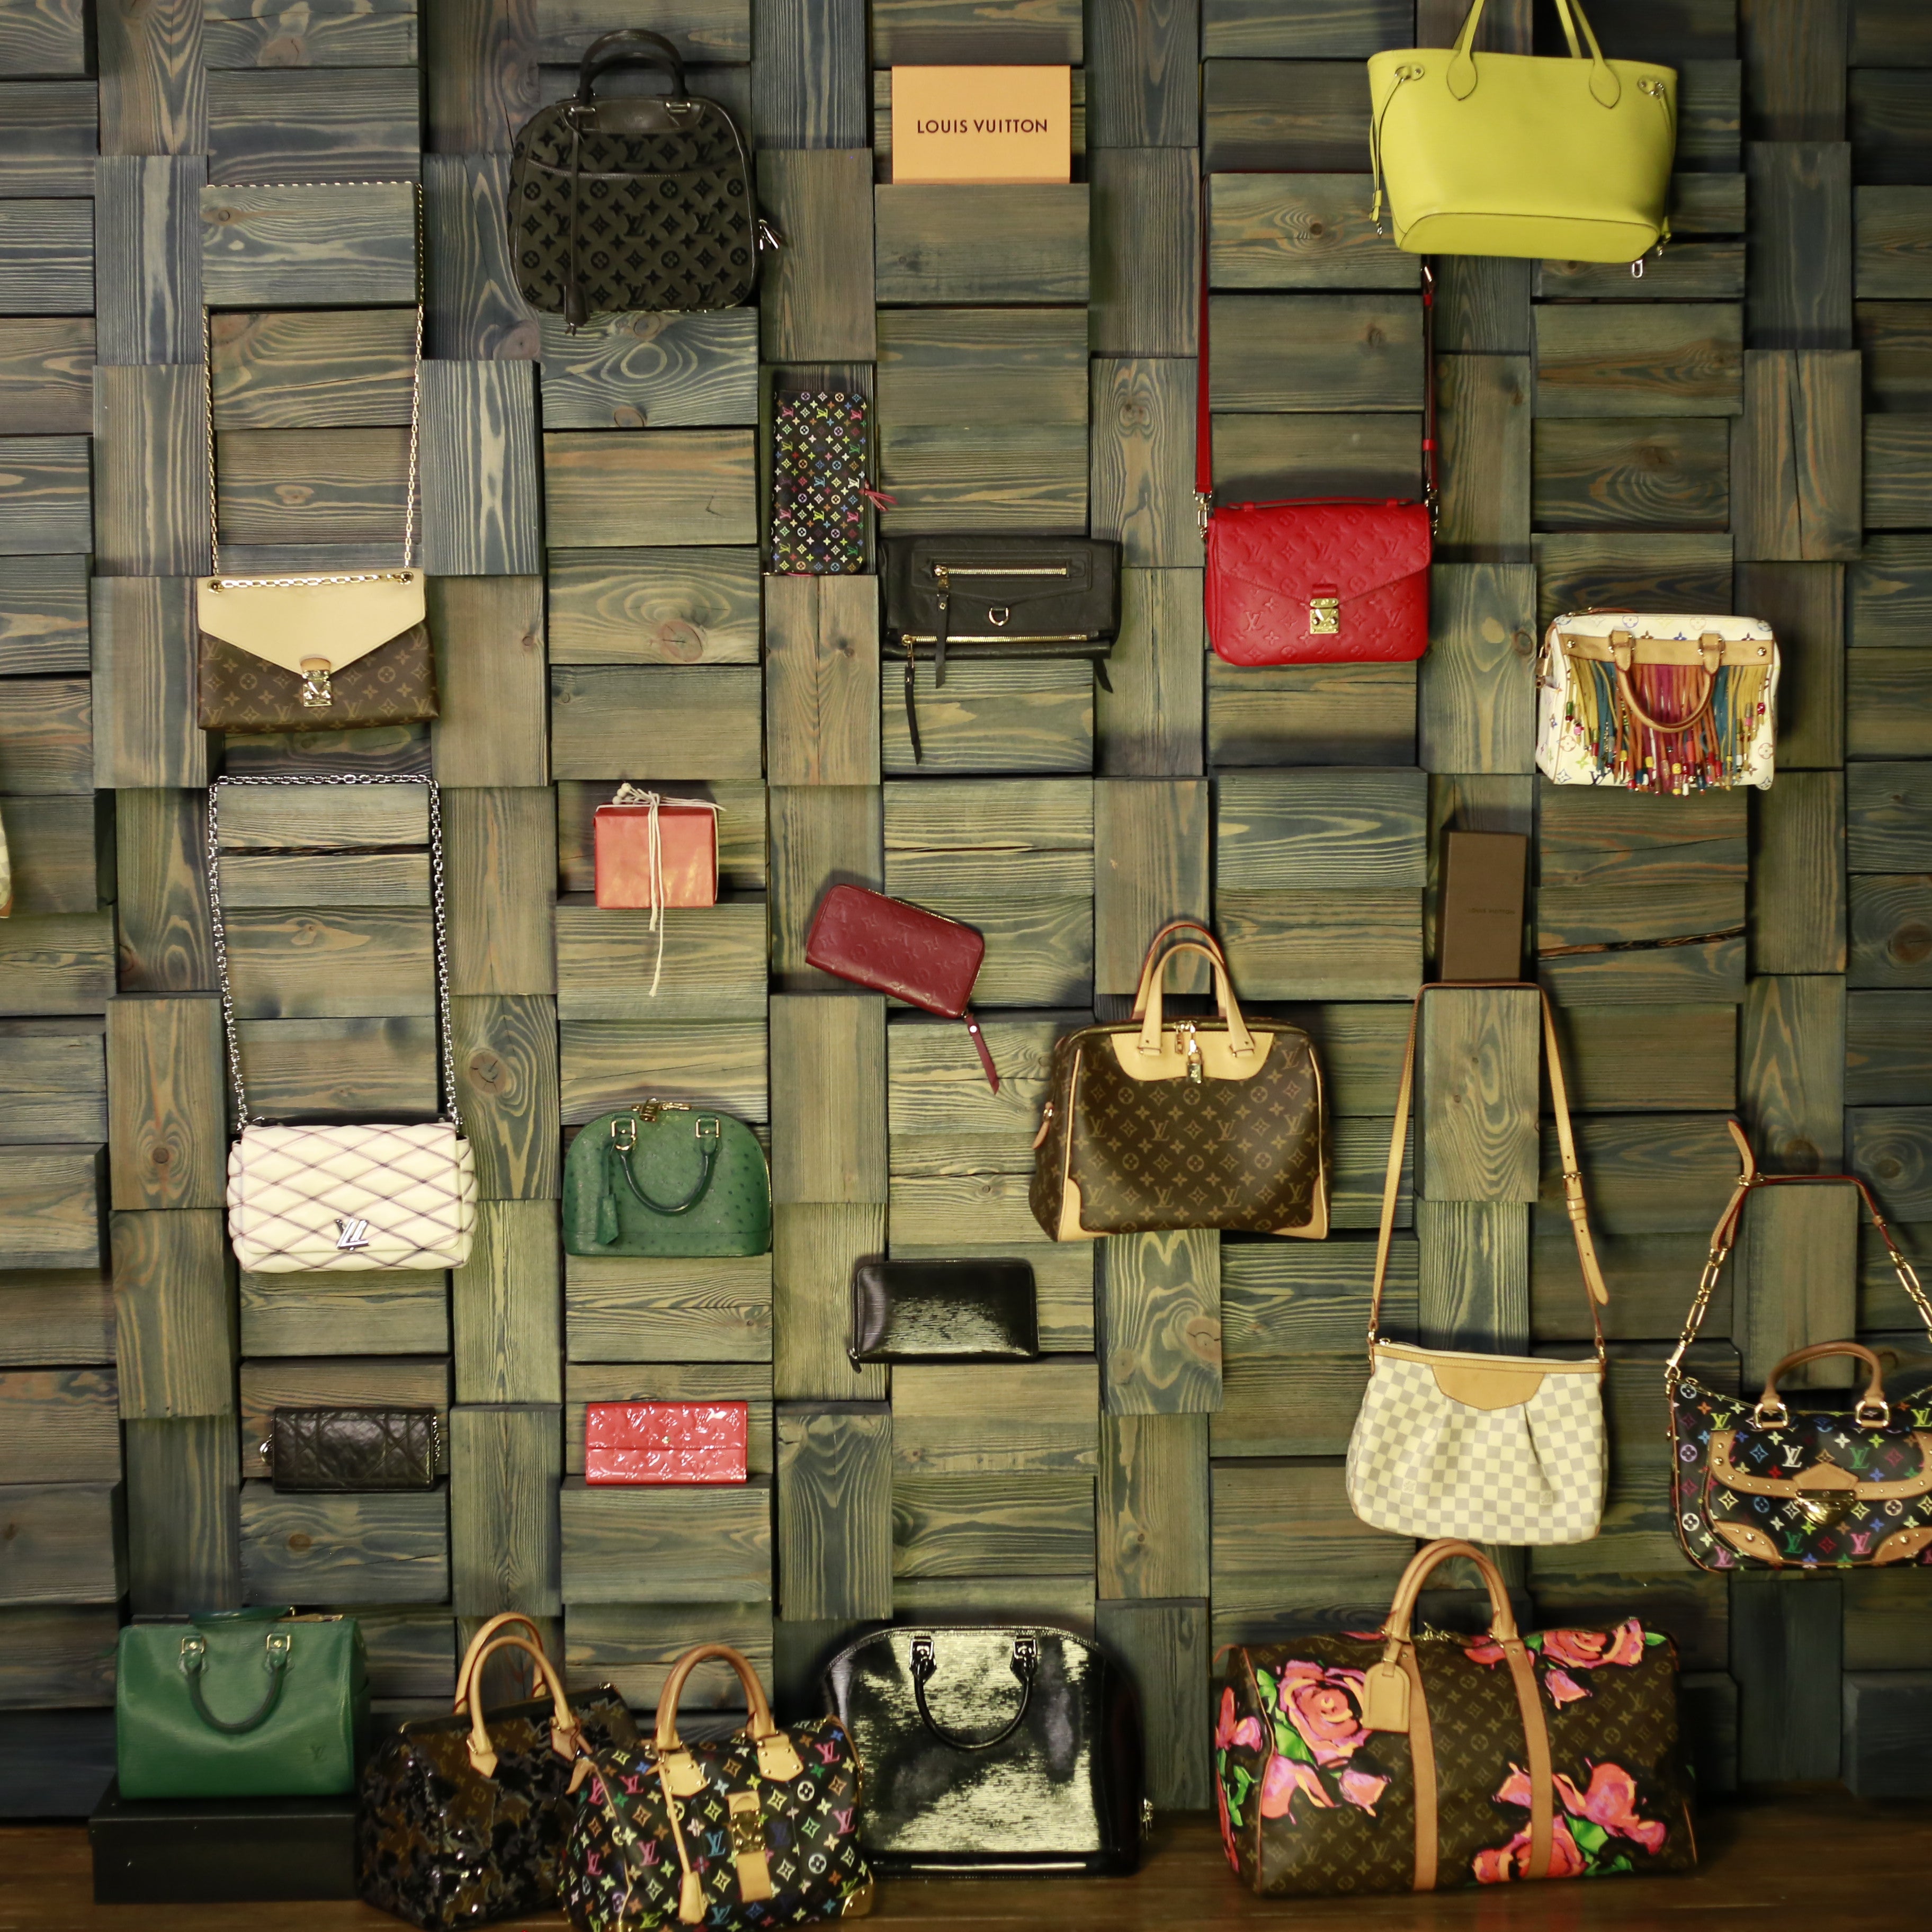 Can You Buy a Fake Bag From A Reputable Consignment Store? – Bagaholic